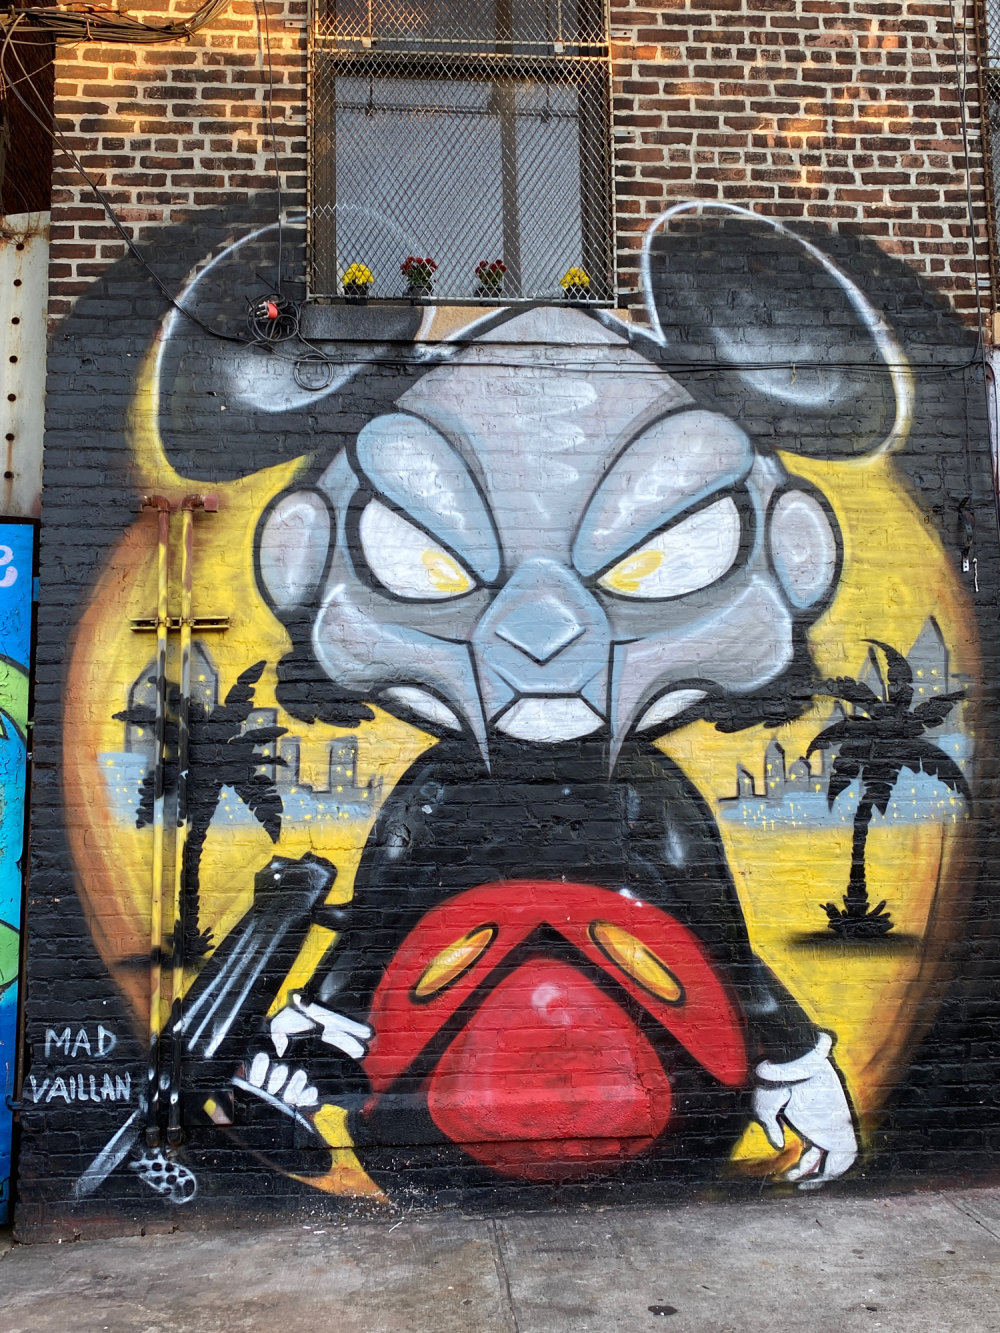 mural in Brooklyn by artist Mad Vaillan.